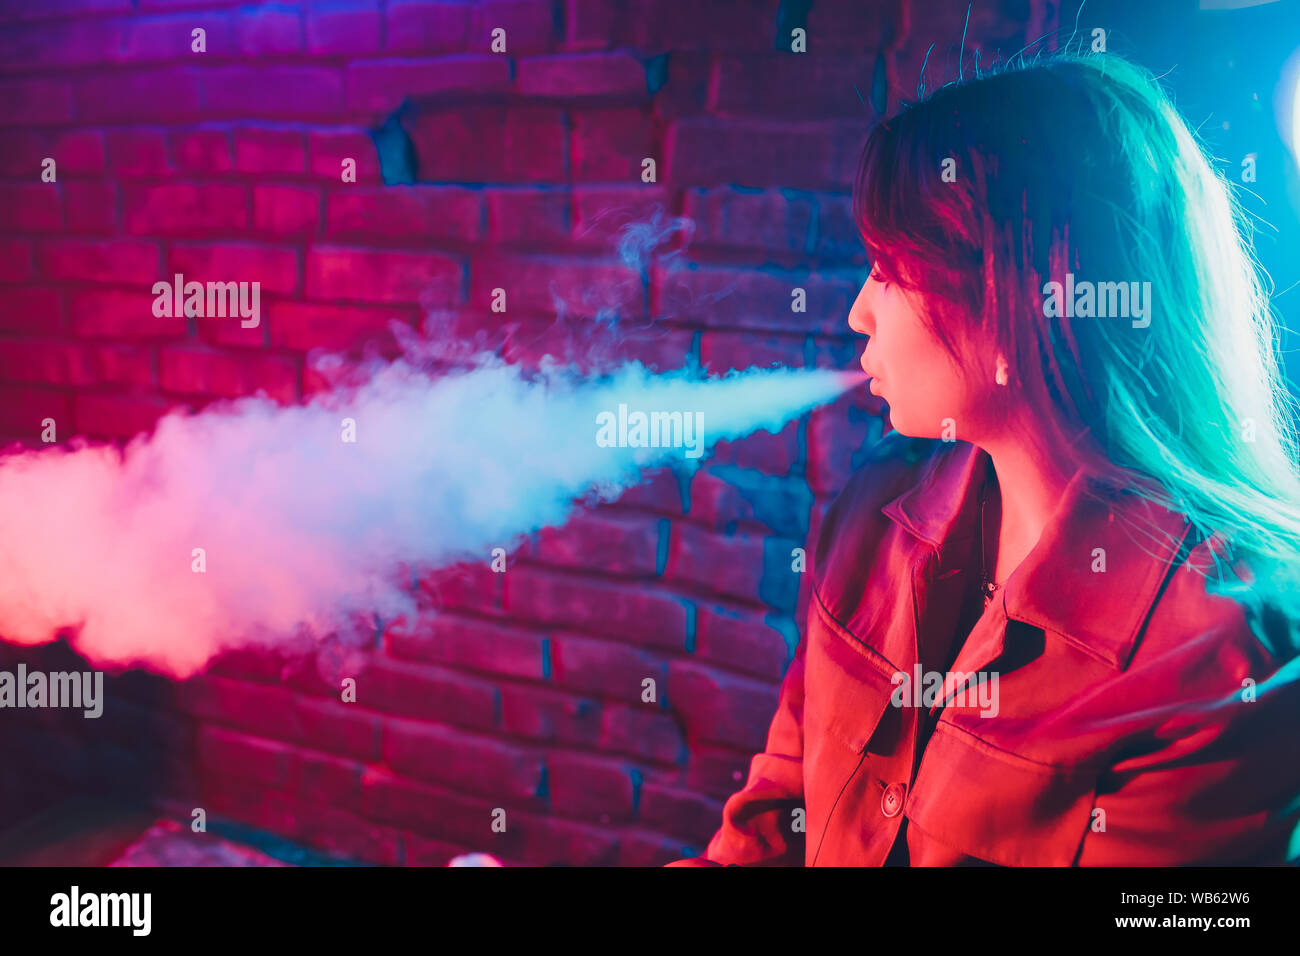 woman smokes a e-cigarette lying on the bed in the room. Smoker's concept Vaping Stock Photo